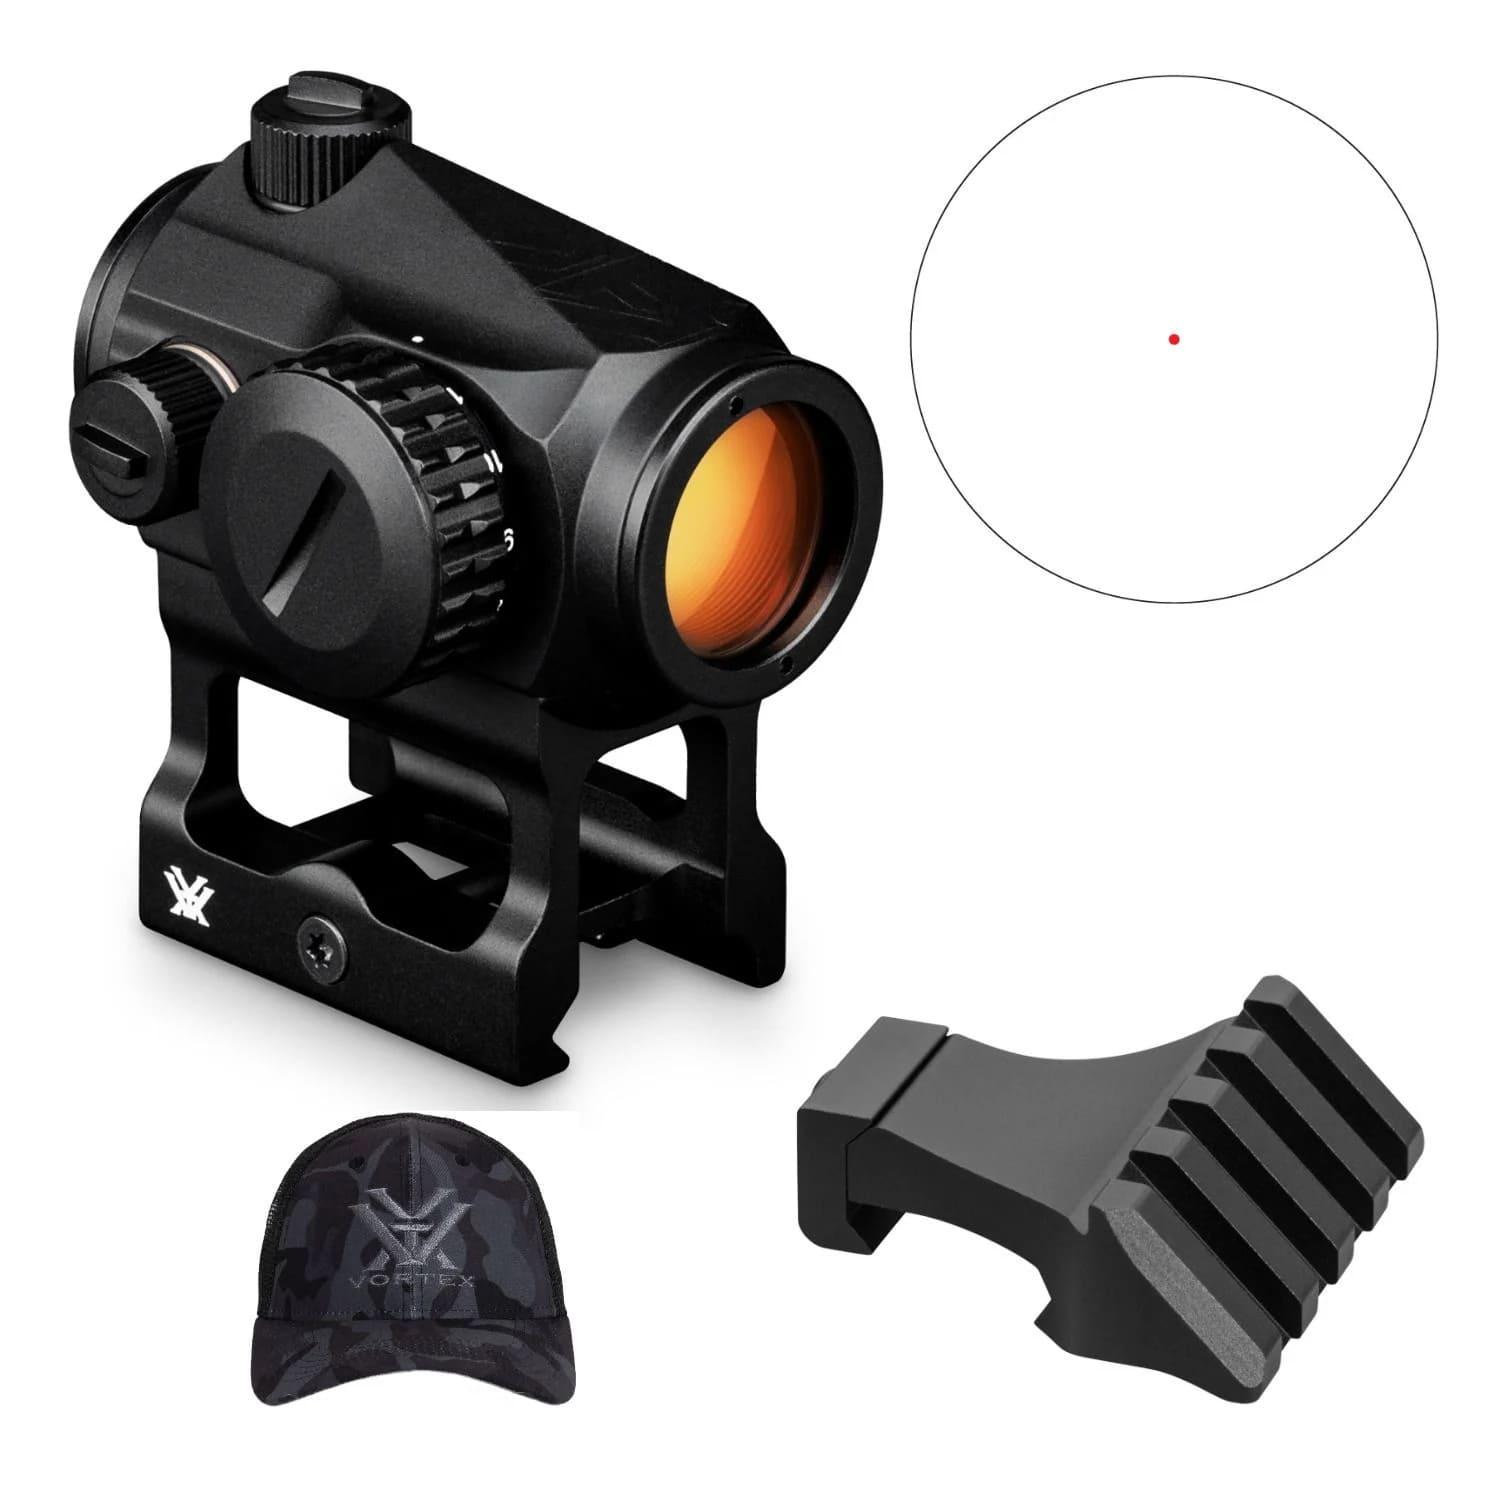 Vortex Crossfire Red Dot Sight (2 MOA Dot Reticle) with 45 Degree Mount Bundle - $194 w/code "FOCUS5" (Free S/H)